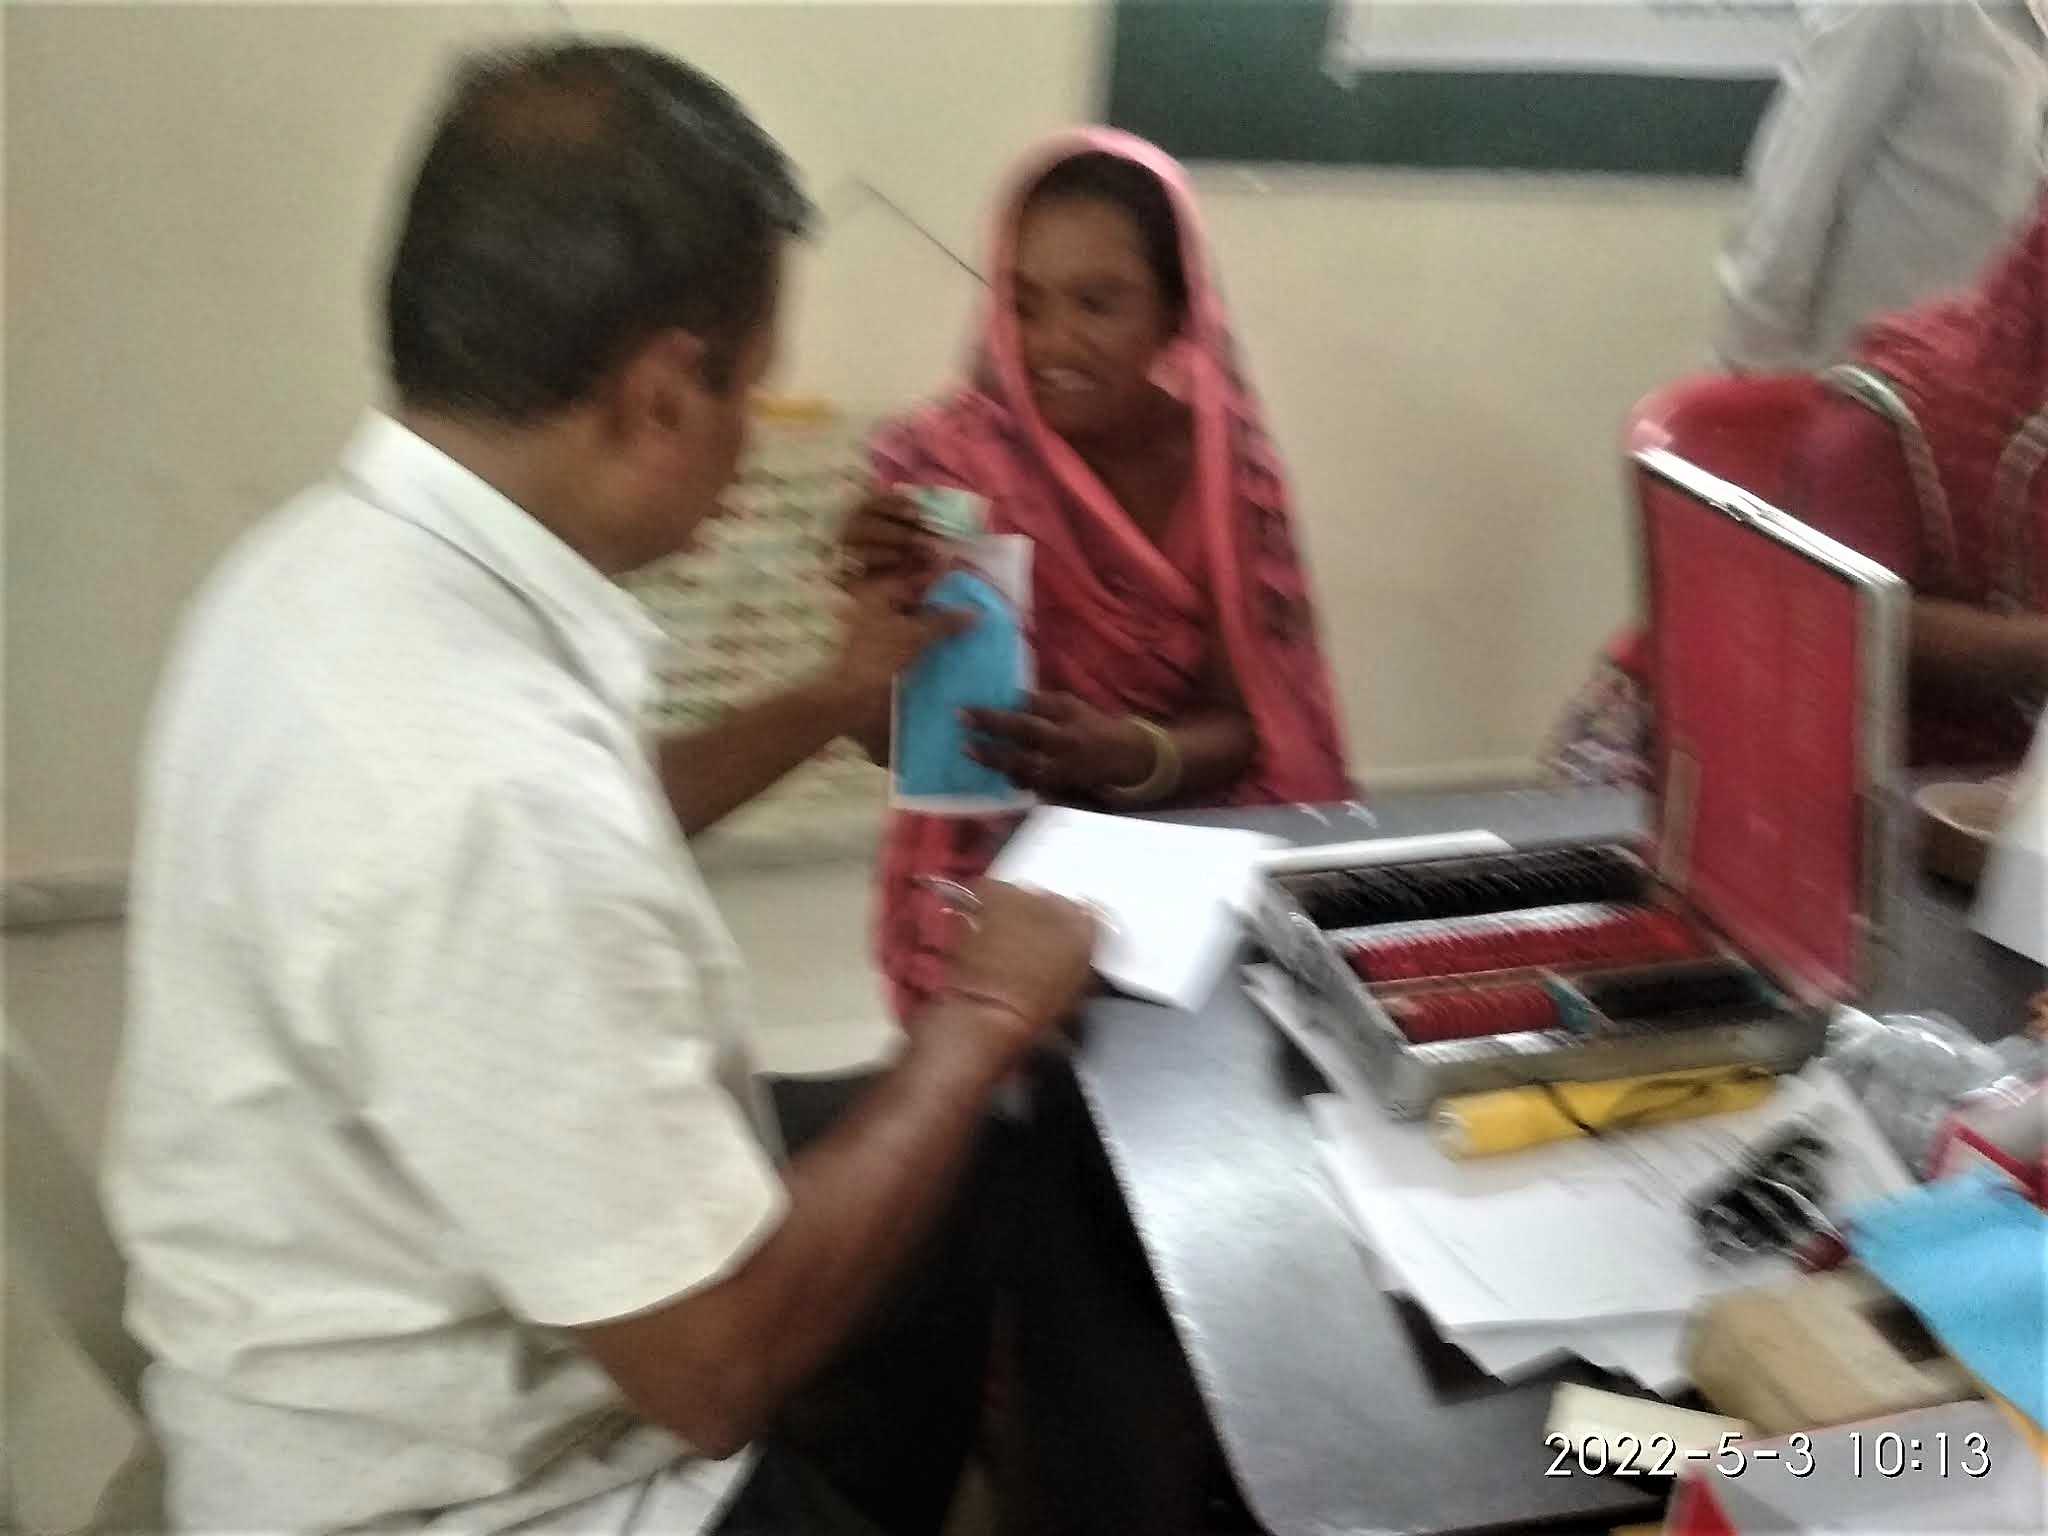 On 03.05.2022 we had a successful EYE CHECK-UP WITH THE DISTRIBUTION OF SPECTACLES and I-BREAST CANCER SCREENING CAMP at village Hebatpur taluka Dadada jilla Surendranagar, Gujarat.
We have distributed 114 spectacles.
A total of 50 females turned up for i-Breast cancer screening of which 40 females screened and no one tested positive. We have distributed 45 sanitary pads to participants.